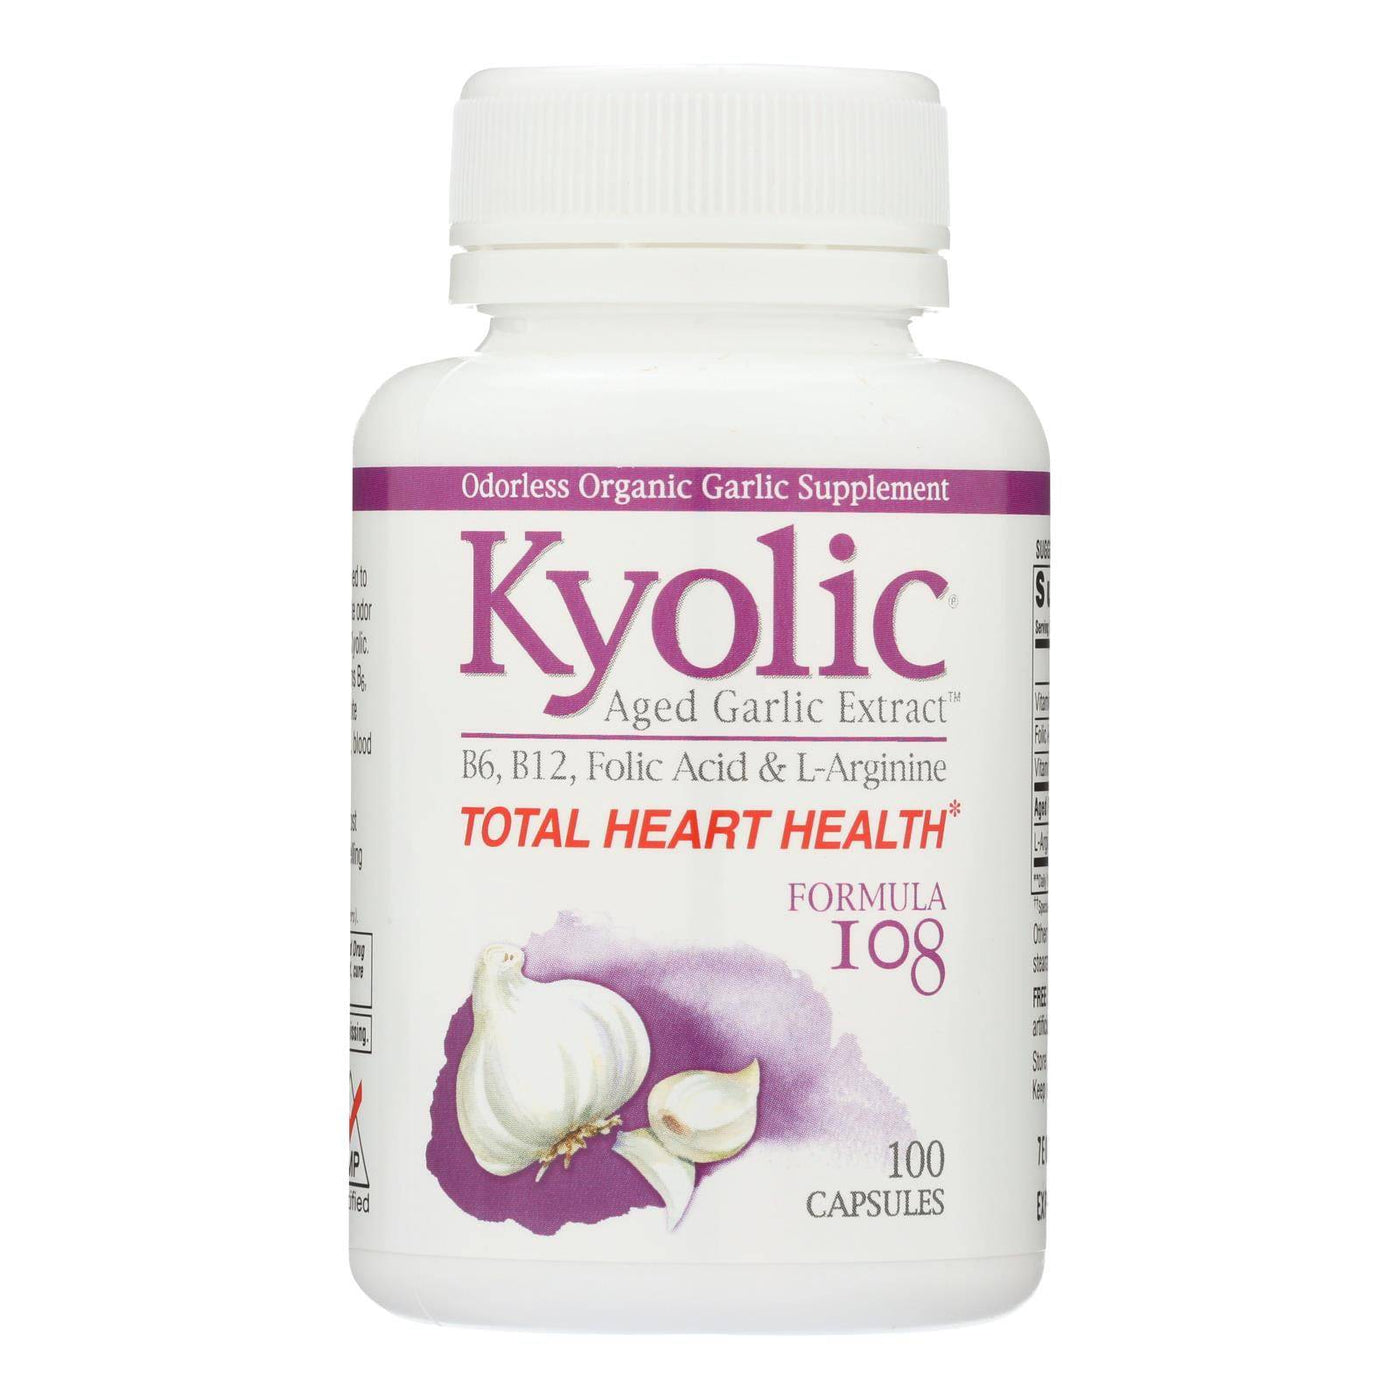 Kyolic - Aged Garlic Extract Total Heart Health Formula 108 - 100 Capsules | OnlyNaturals.us